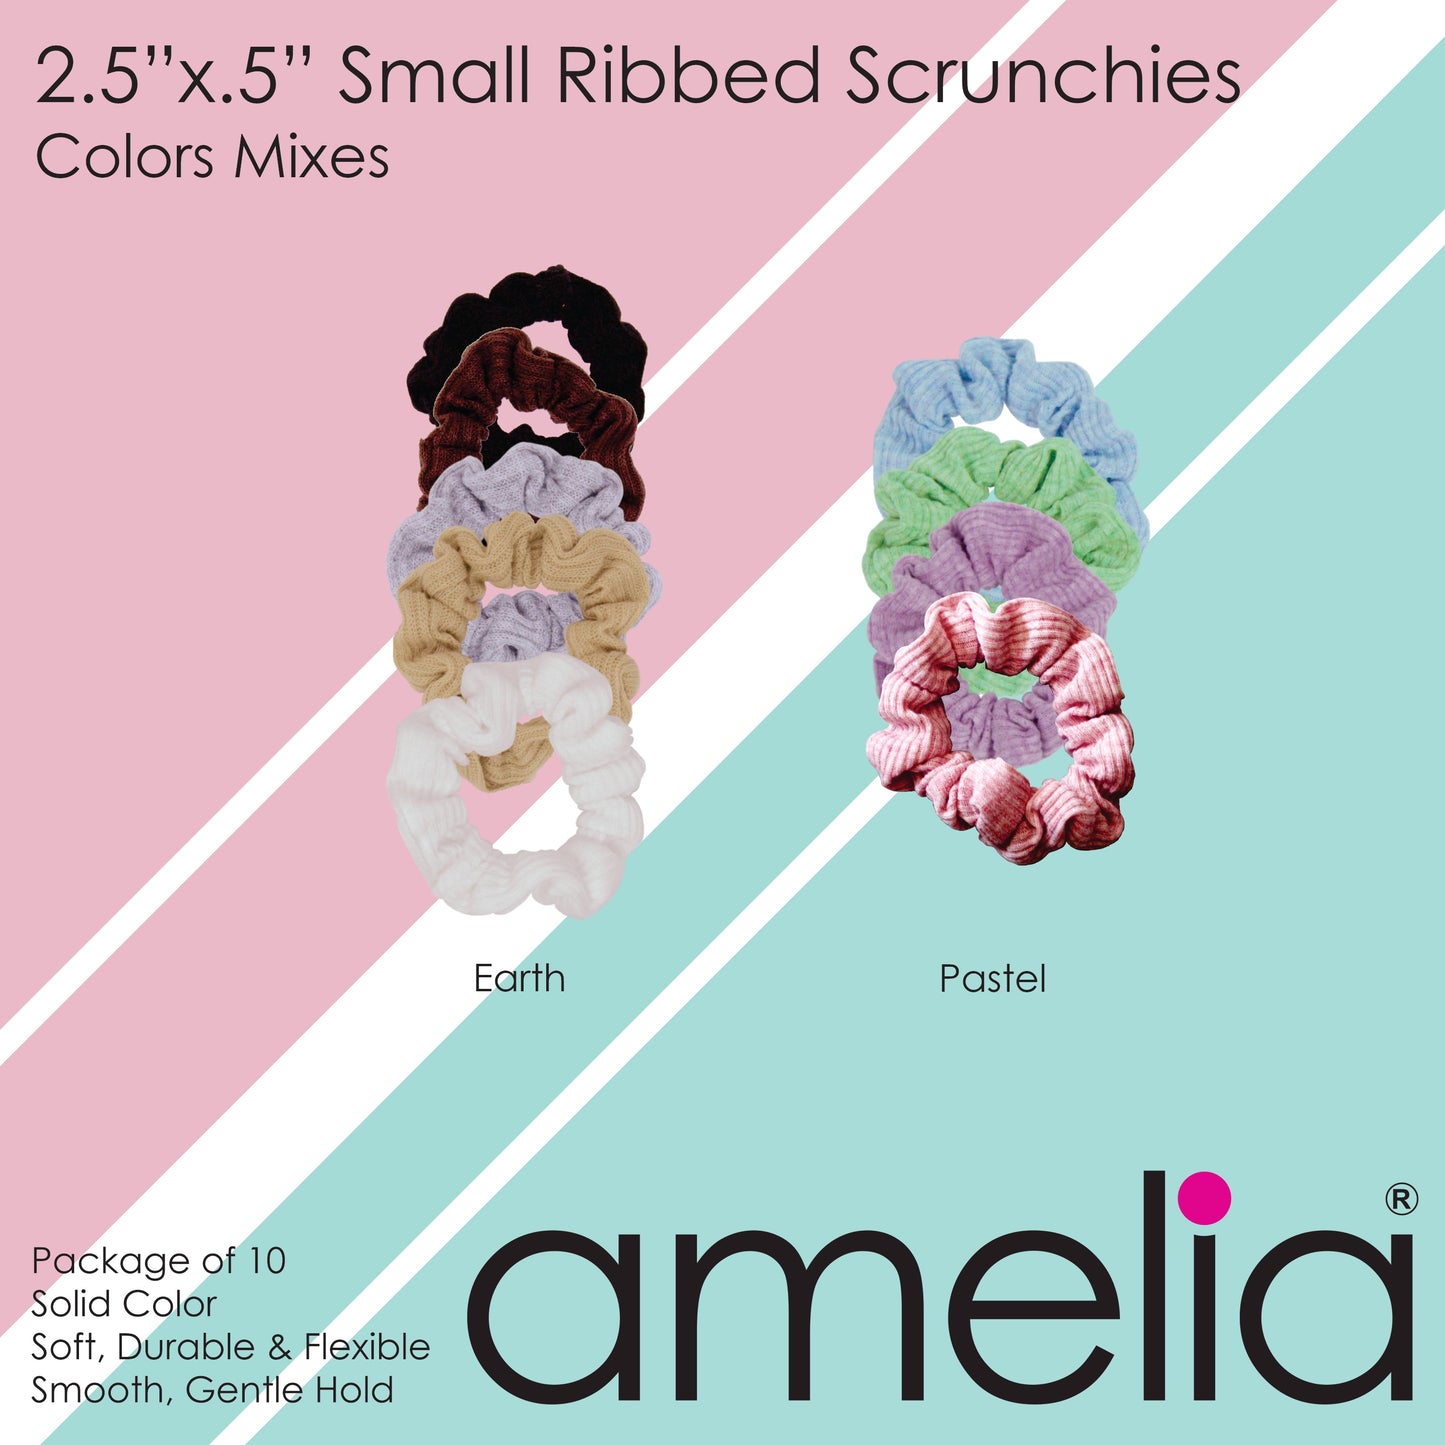 Amelia Beauty, Medium Tan Ribbed Scrunchies, 2.5in Diameter, Gentle on Hair, Strong Hold, No Snag, No Dents or Creases. 10 Pack